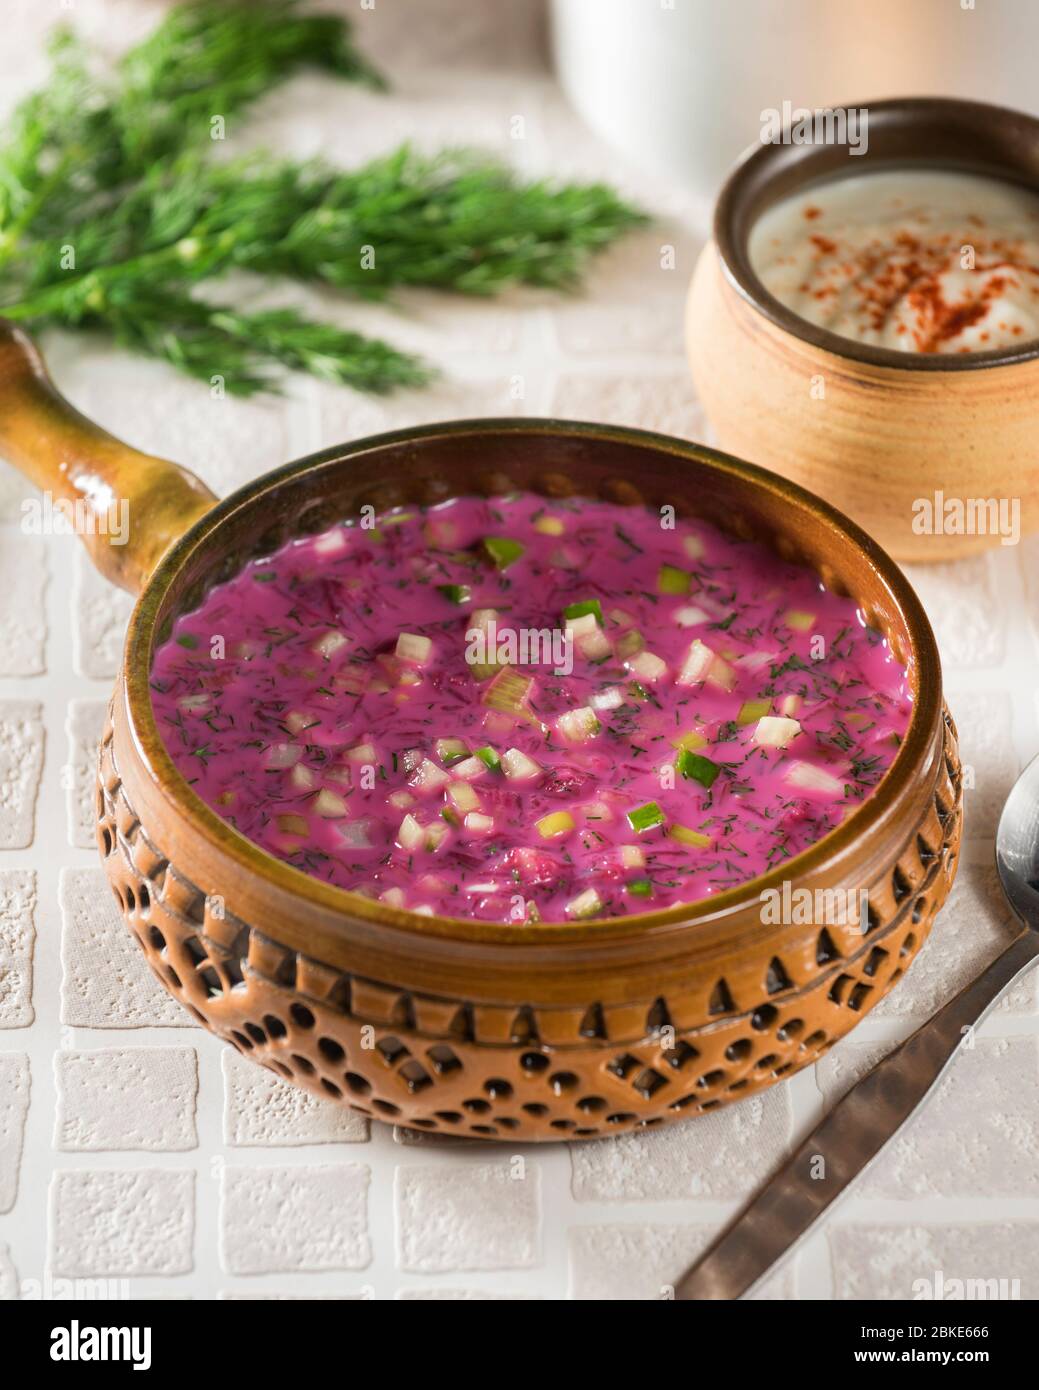 Holodnik. Chilled beetroot soup. Russia Food Stock Photo